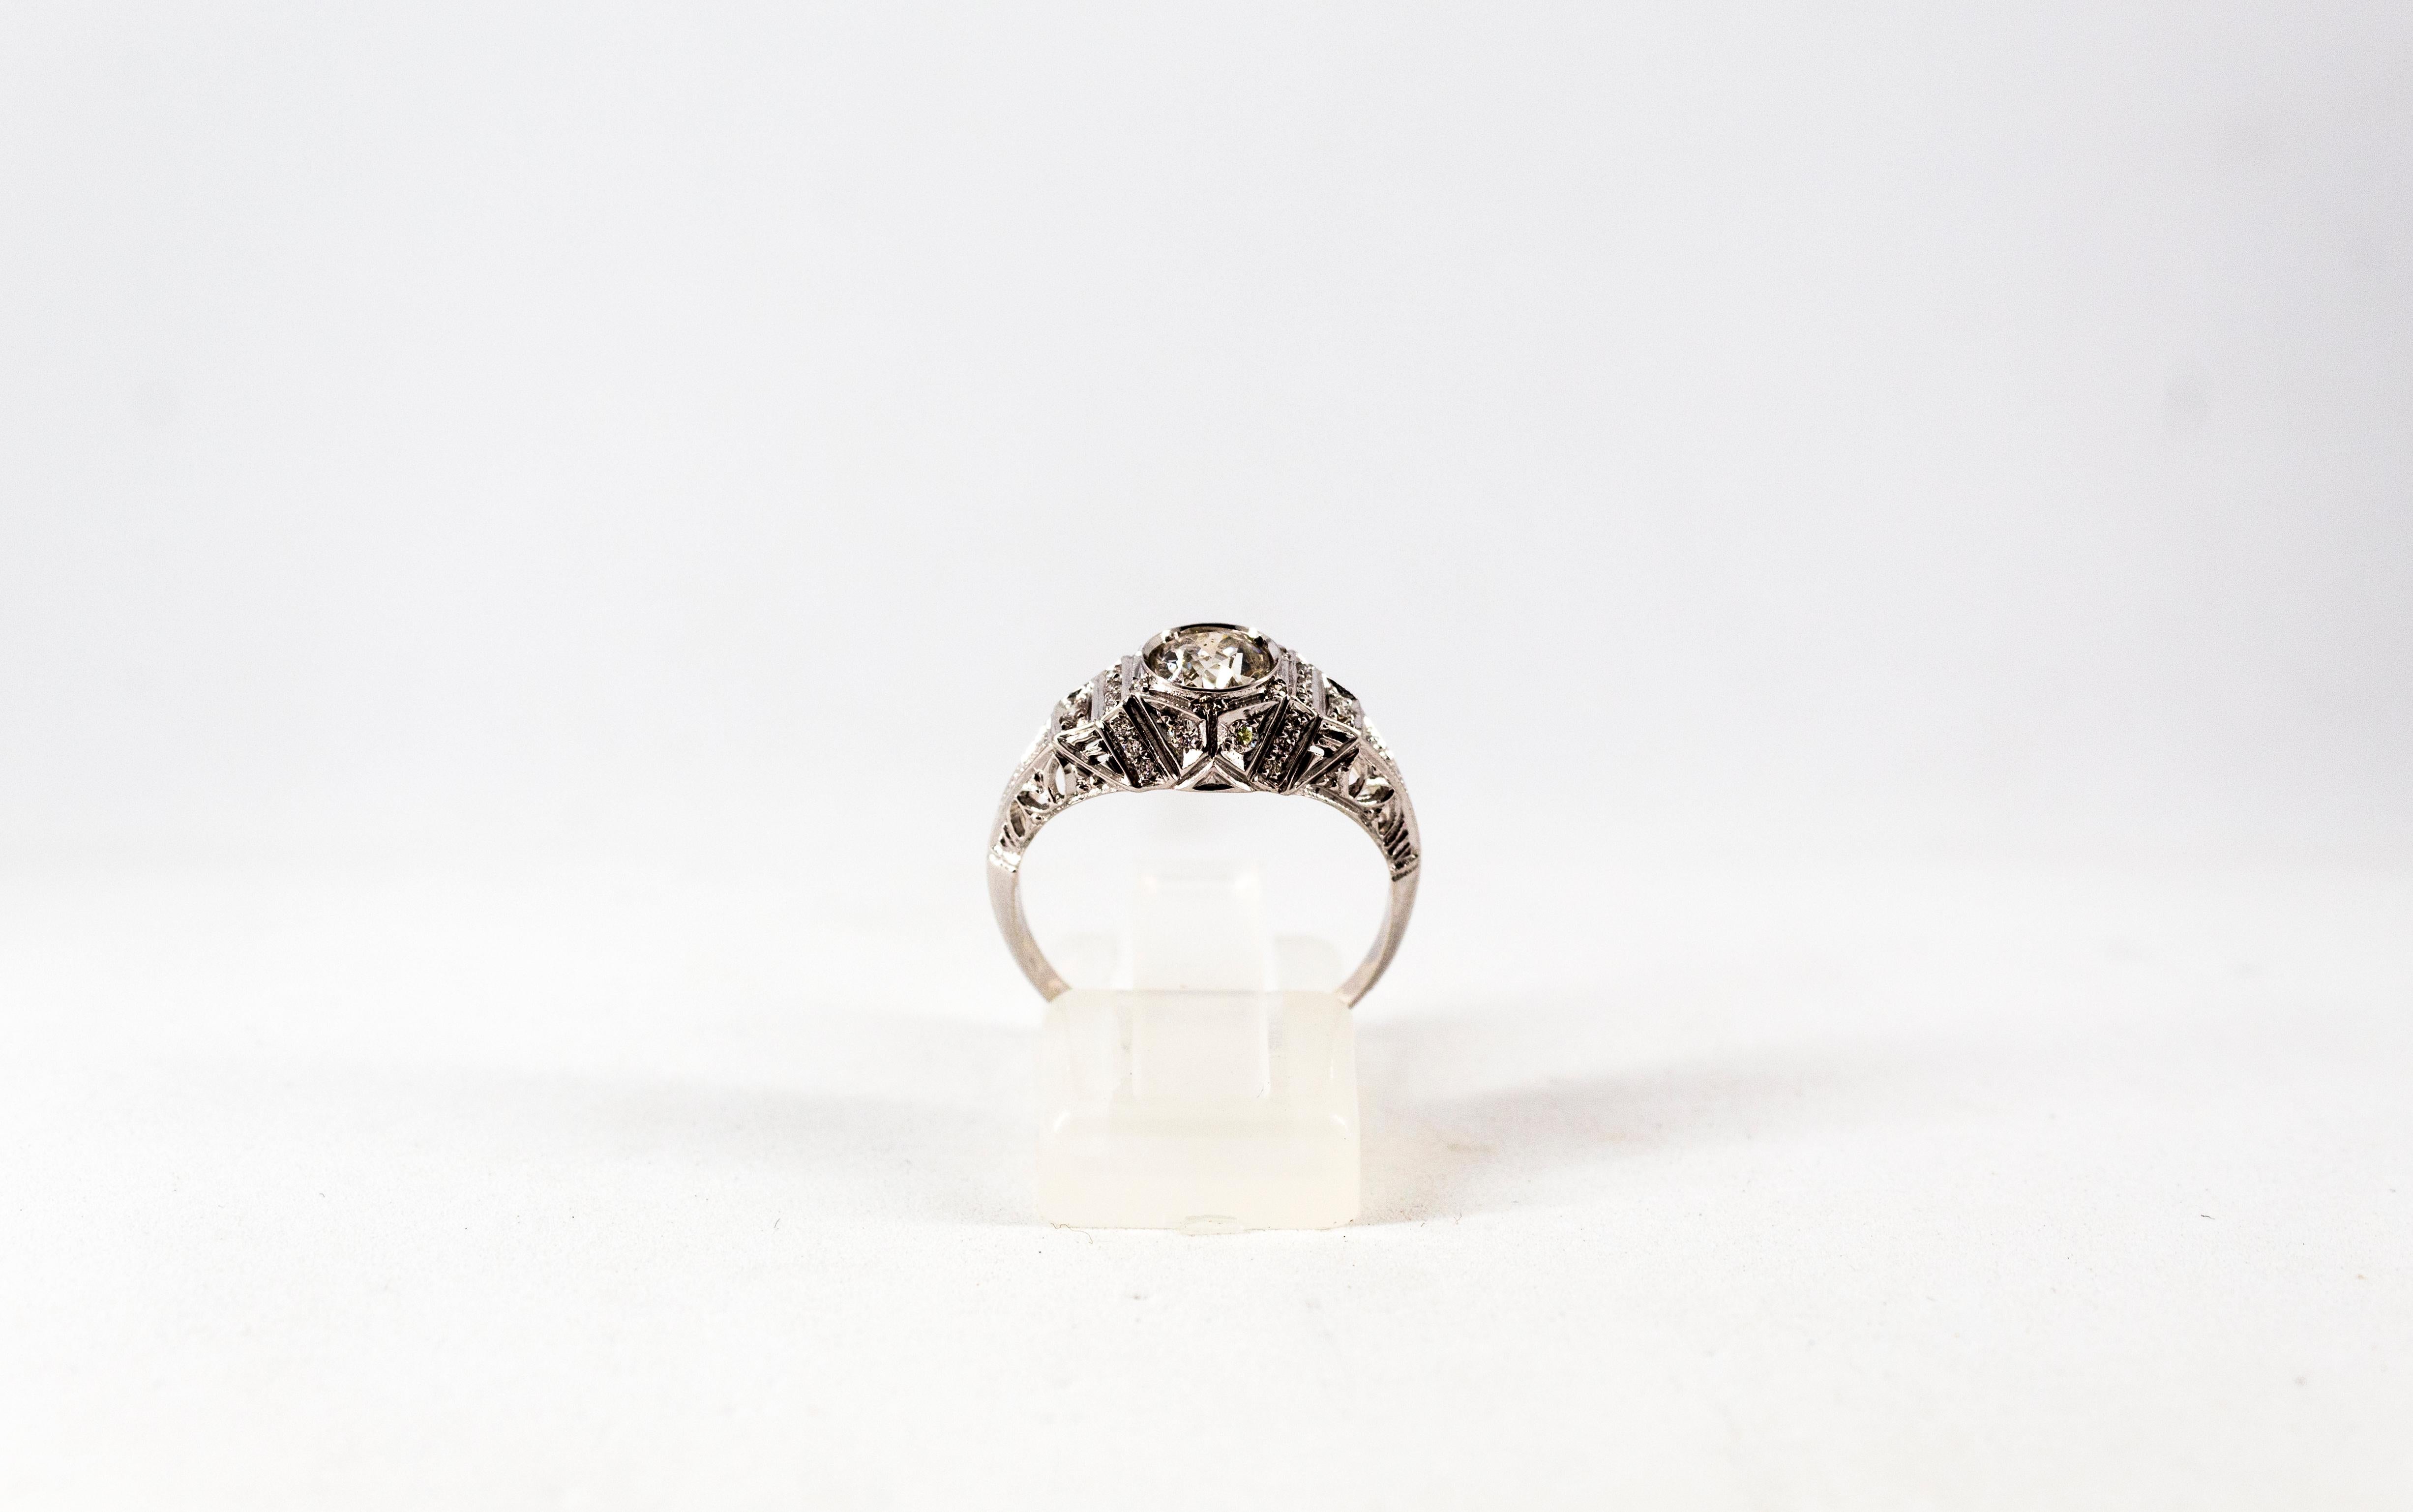 This Ring is made of 18K White Gold.
This Ring has a 0.57 Carats Central White Old European Cut Diamond.
This Ring has 0.16 Carats of White Modern Round Cut Diamonds.

Size ITA: 14 USA: 6 3/4

We're a workshop so every piece is handmade,